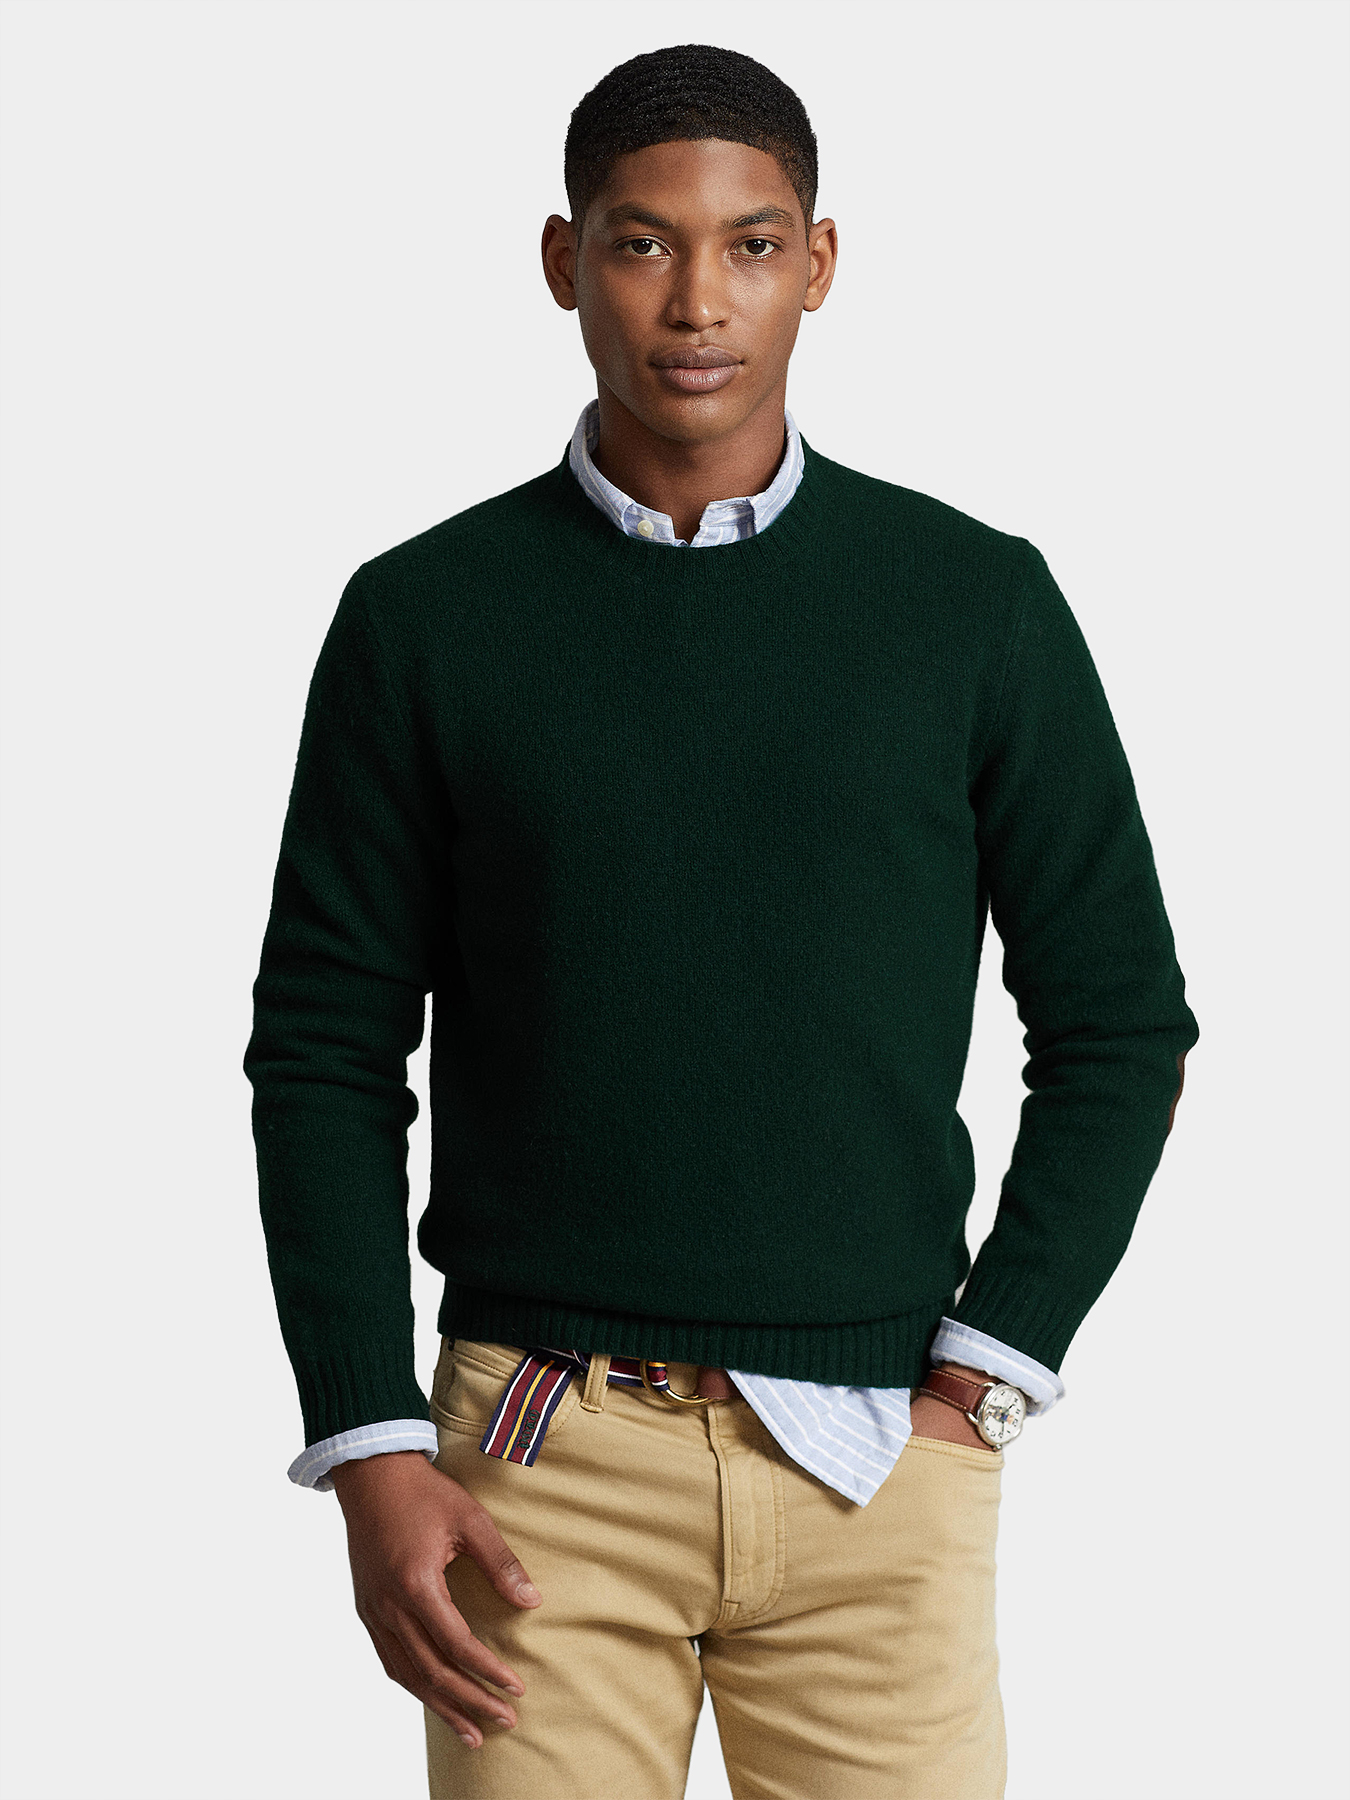 Dark green sweater with patches on the sleeves brand POLO RALPH LAUREN —  /en